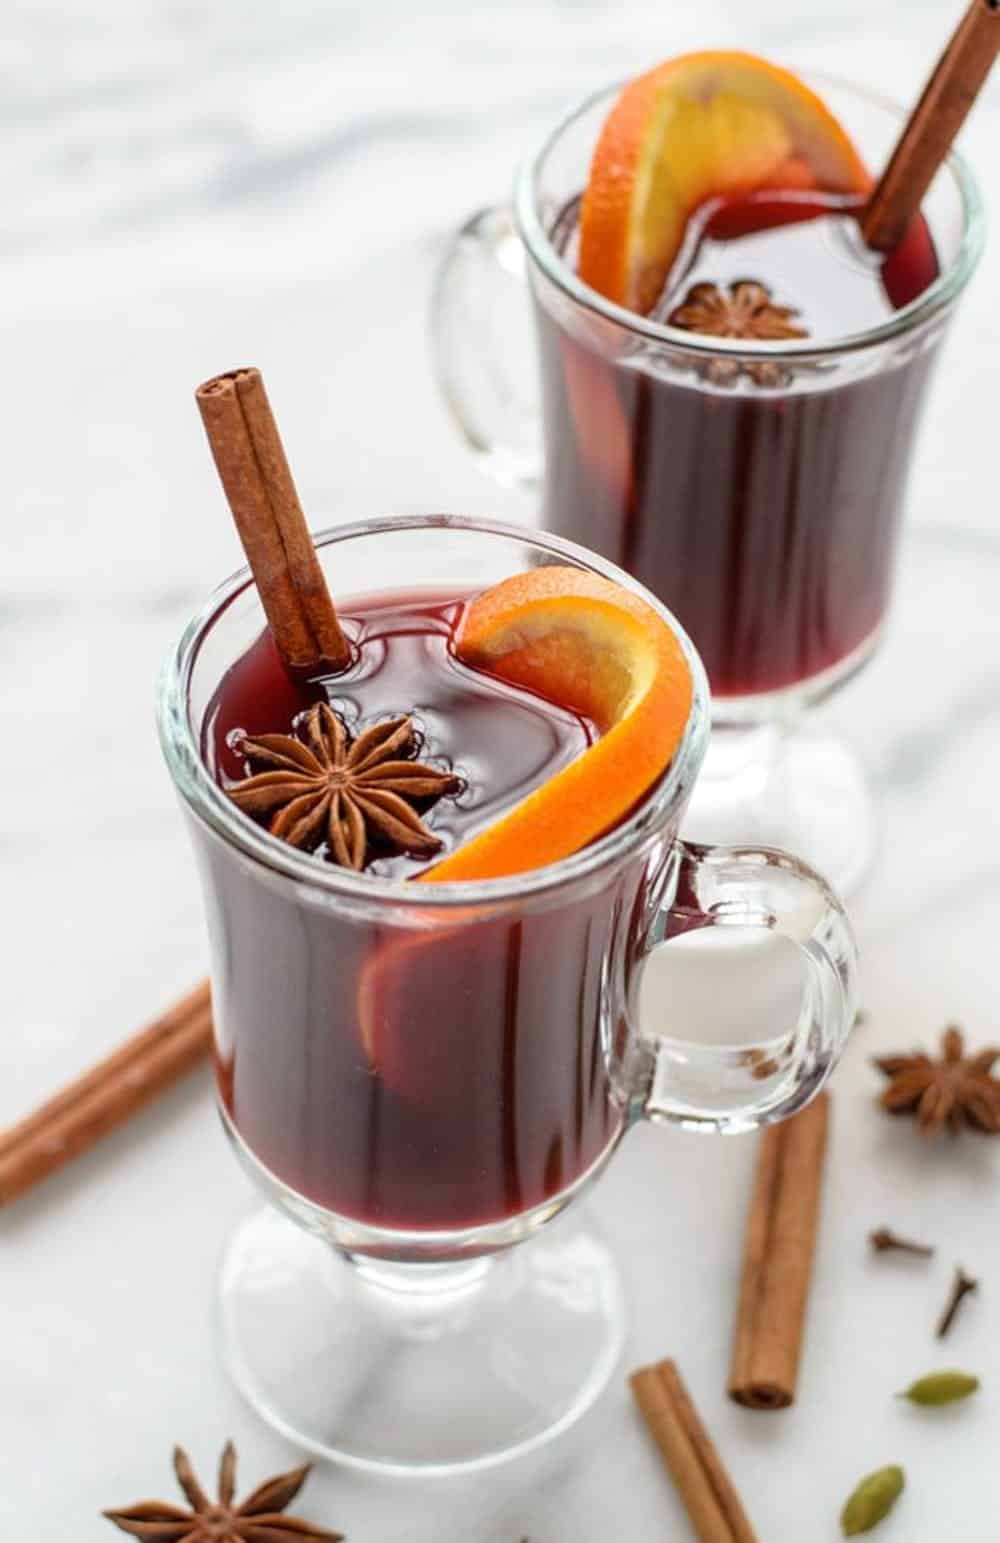 Slow cooker spiced wine